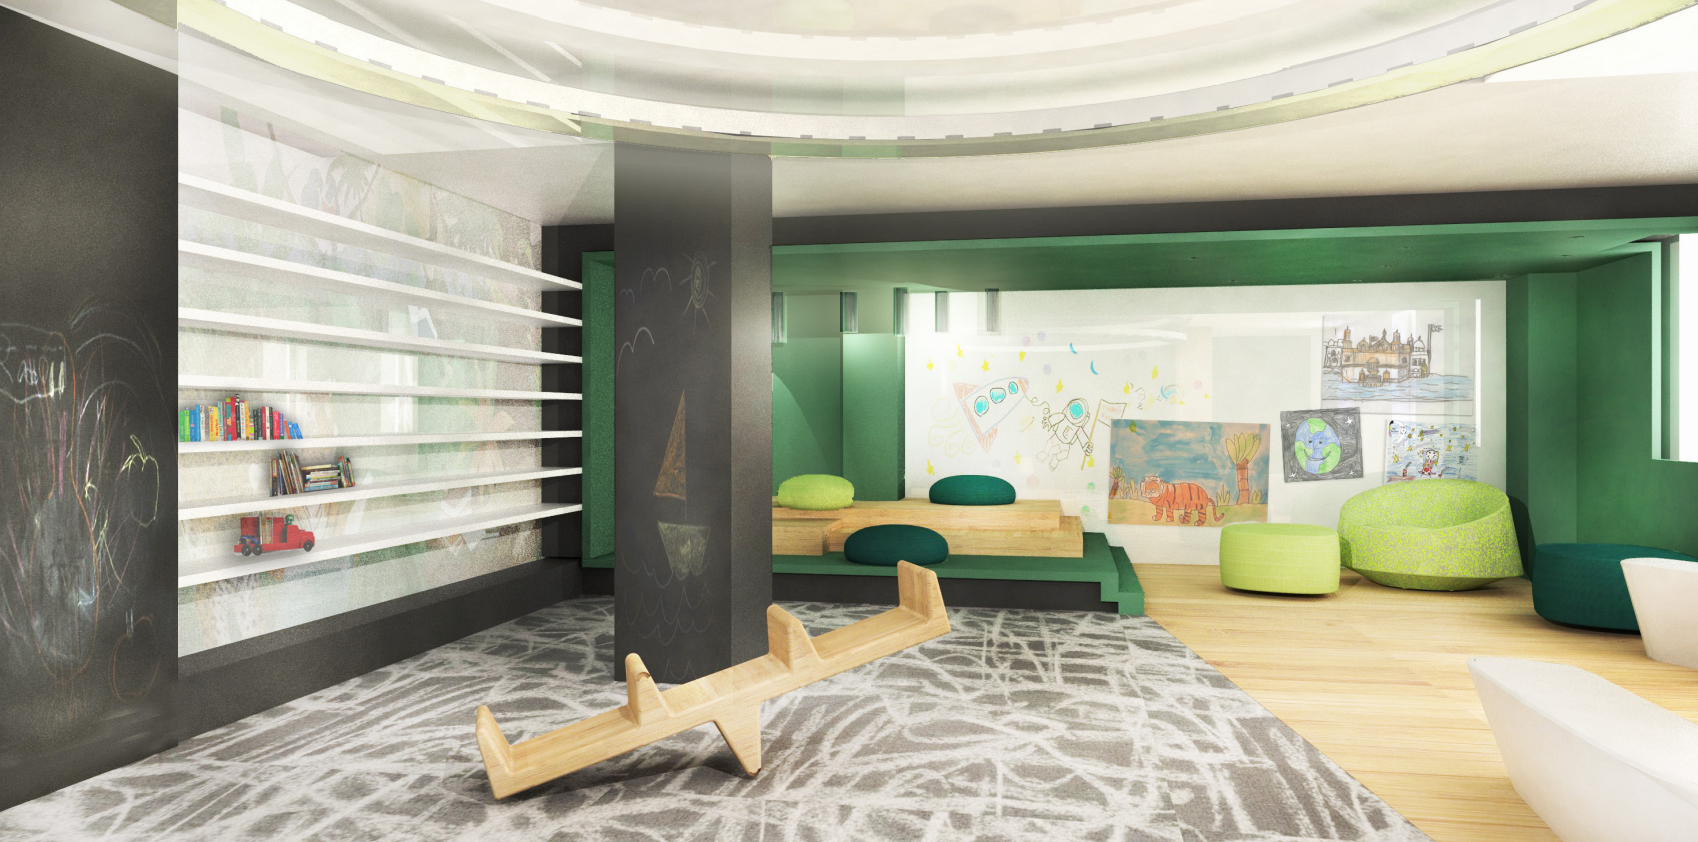 Playroom at 38 Sixth Avenue, rendering by SHoP Architects